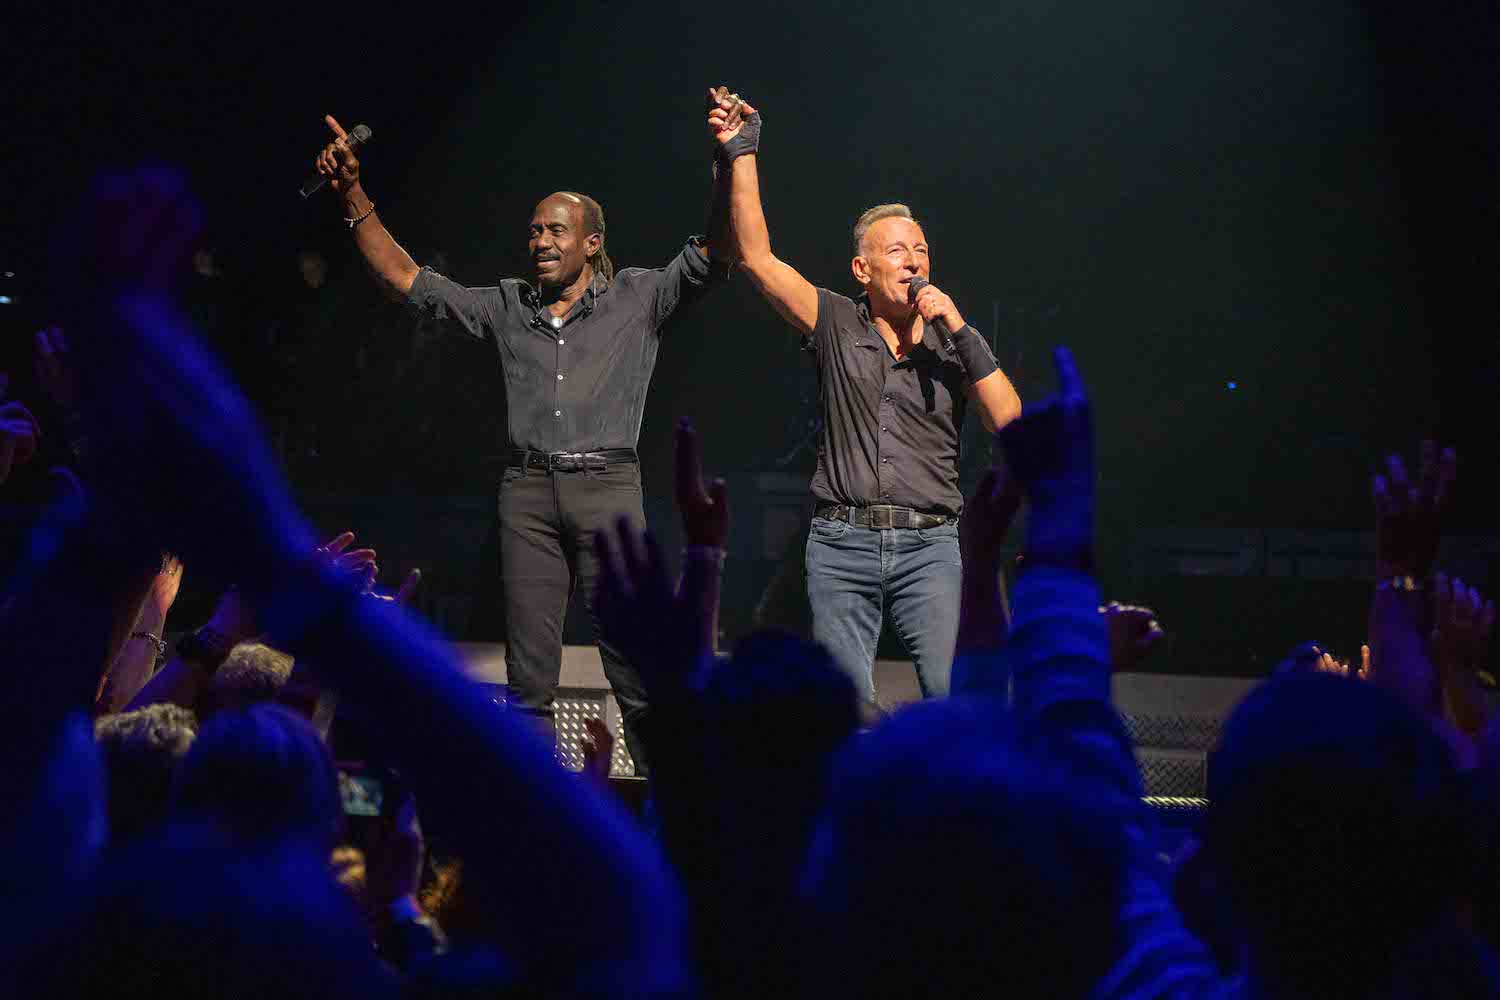 Bruce Springsteen & E Street Band at CFG Bank Arena, Baltimore, MD on April 7, 2023.